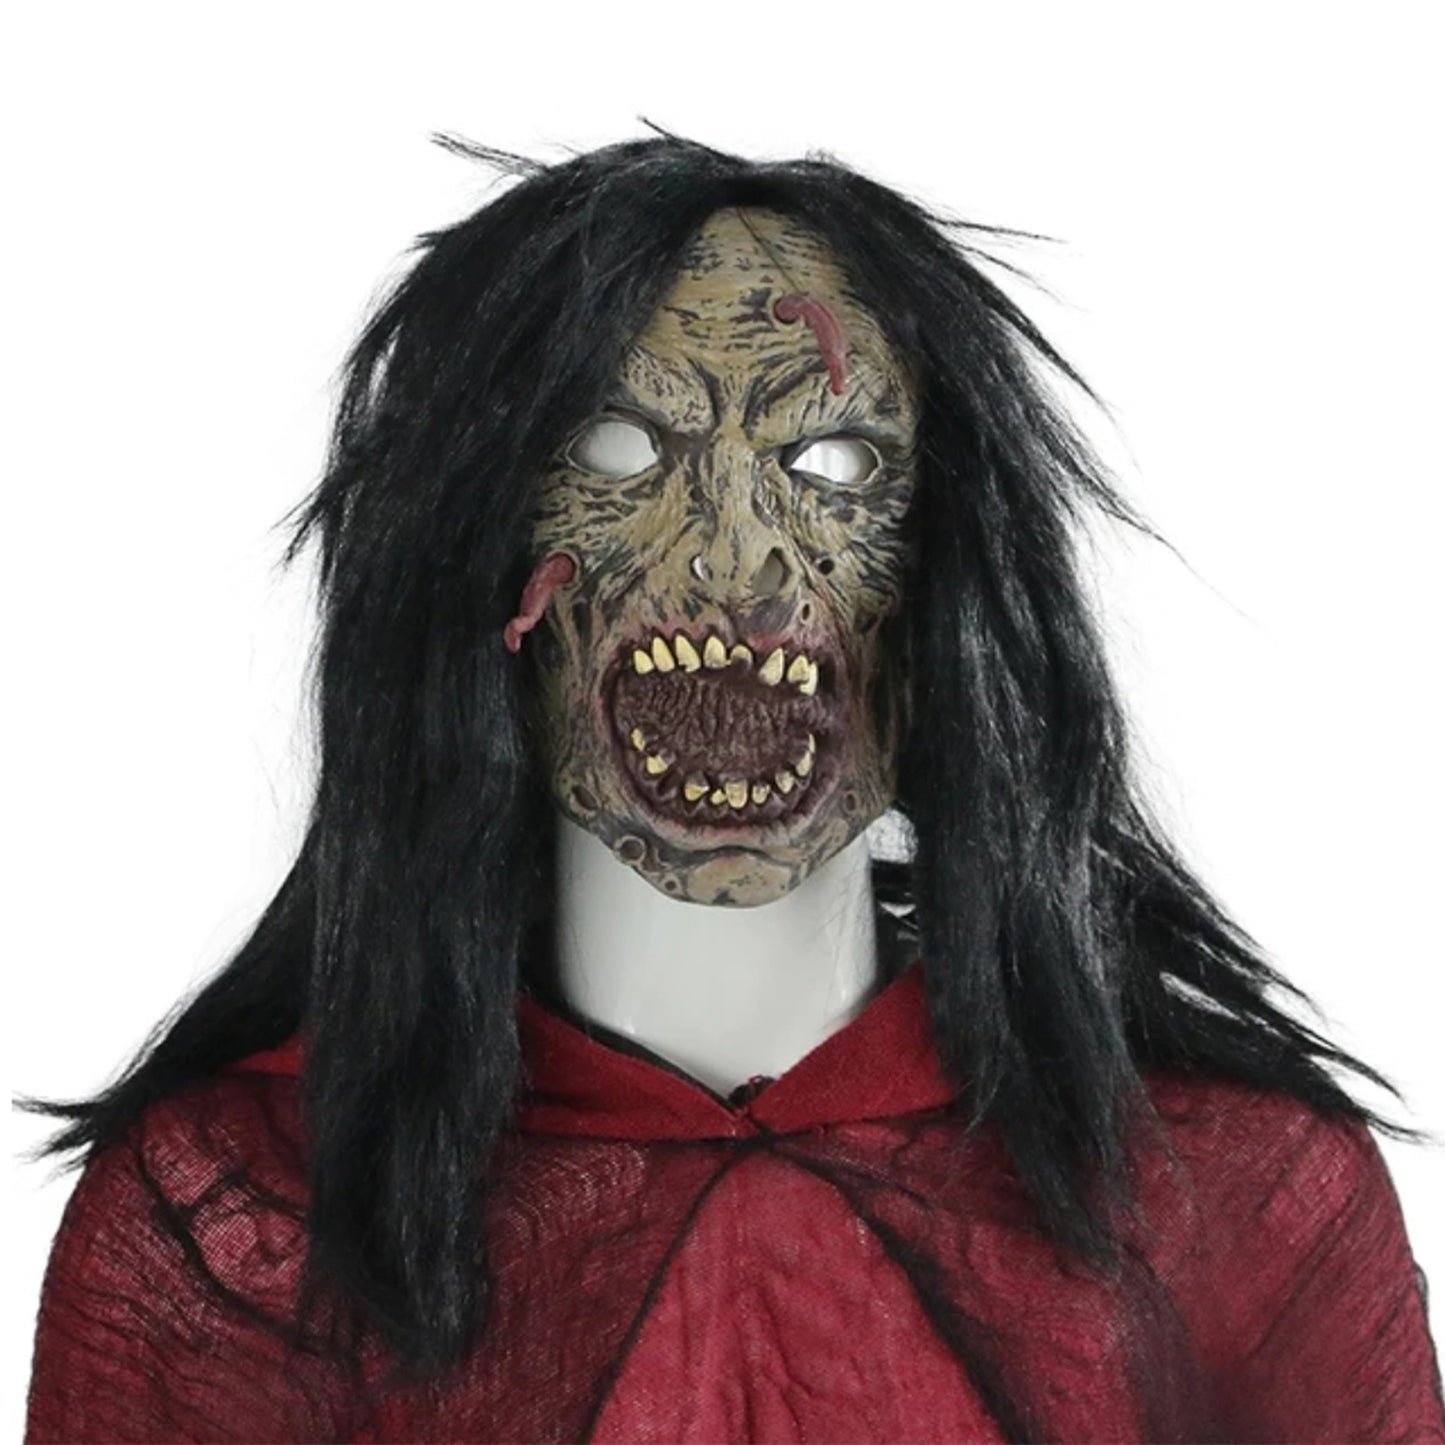 Creepy Horror Worm Mask for Halloween - Perfect Scary Costume Accessory for Haunted Houses and Parties